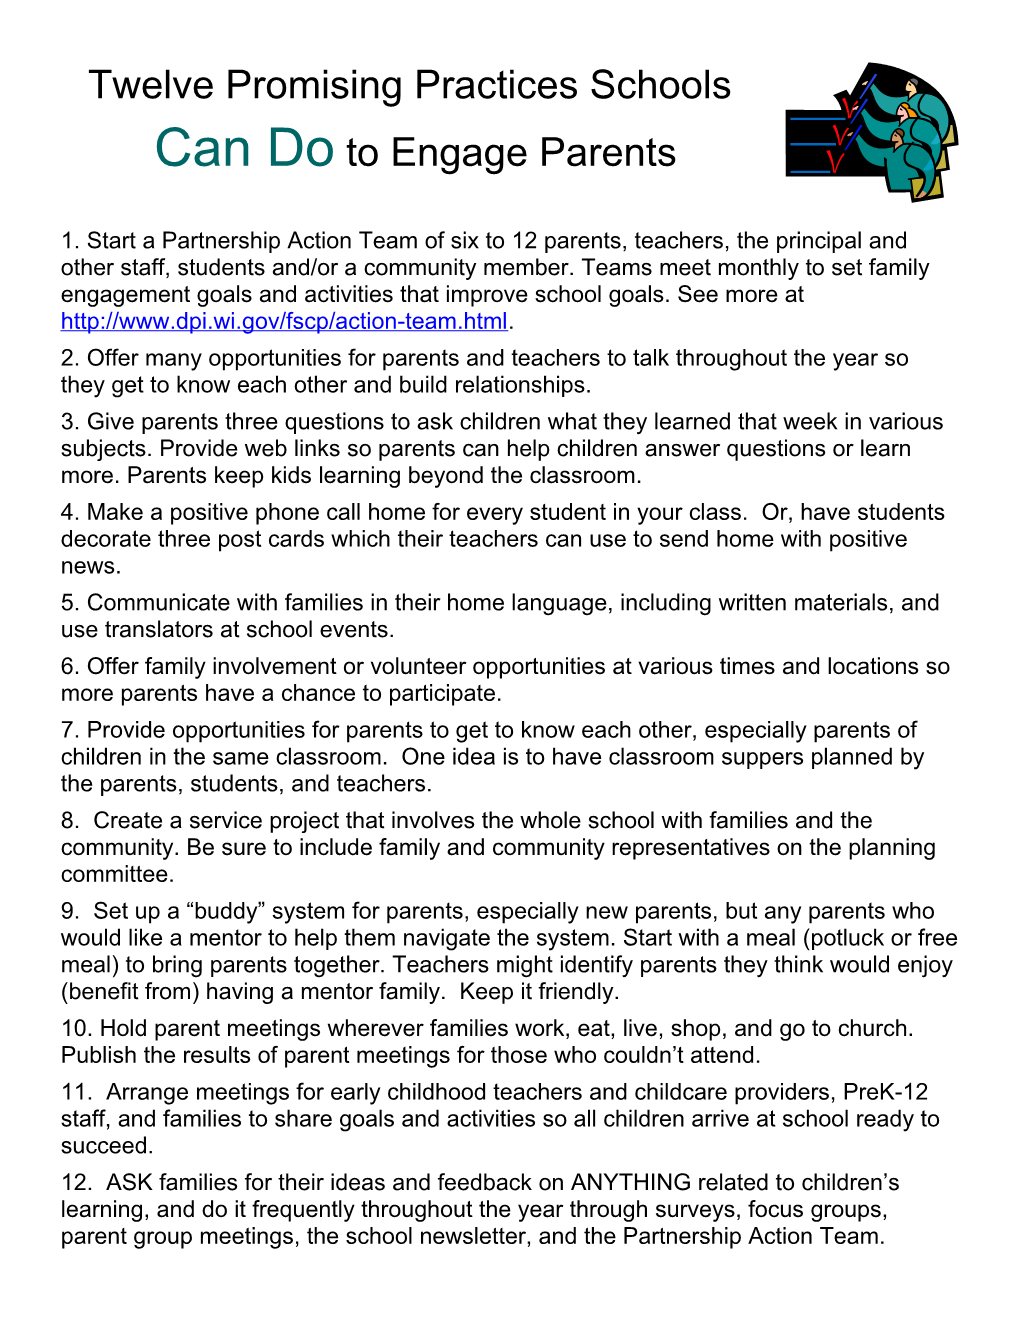 Twelve Promising Practices Schools Can Do to Engage Parents